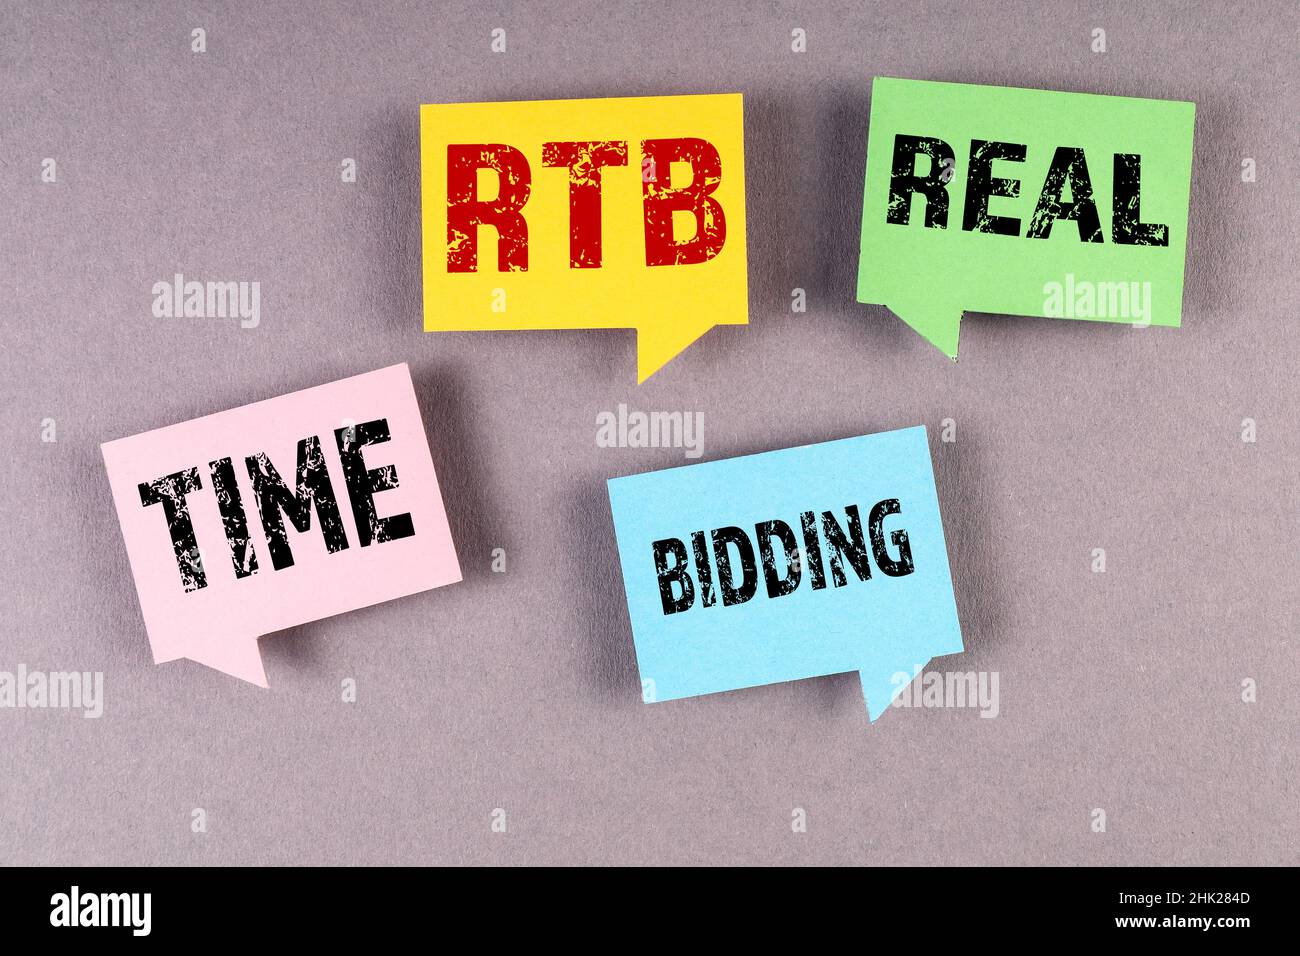 RTB Real Time Bidding. Speech bubbles on a gray background. Stock Photo